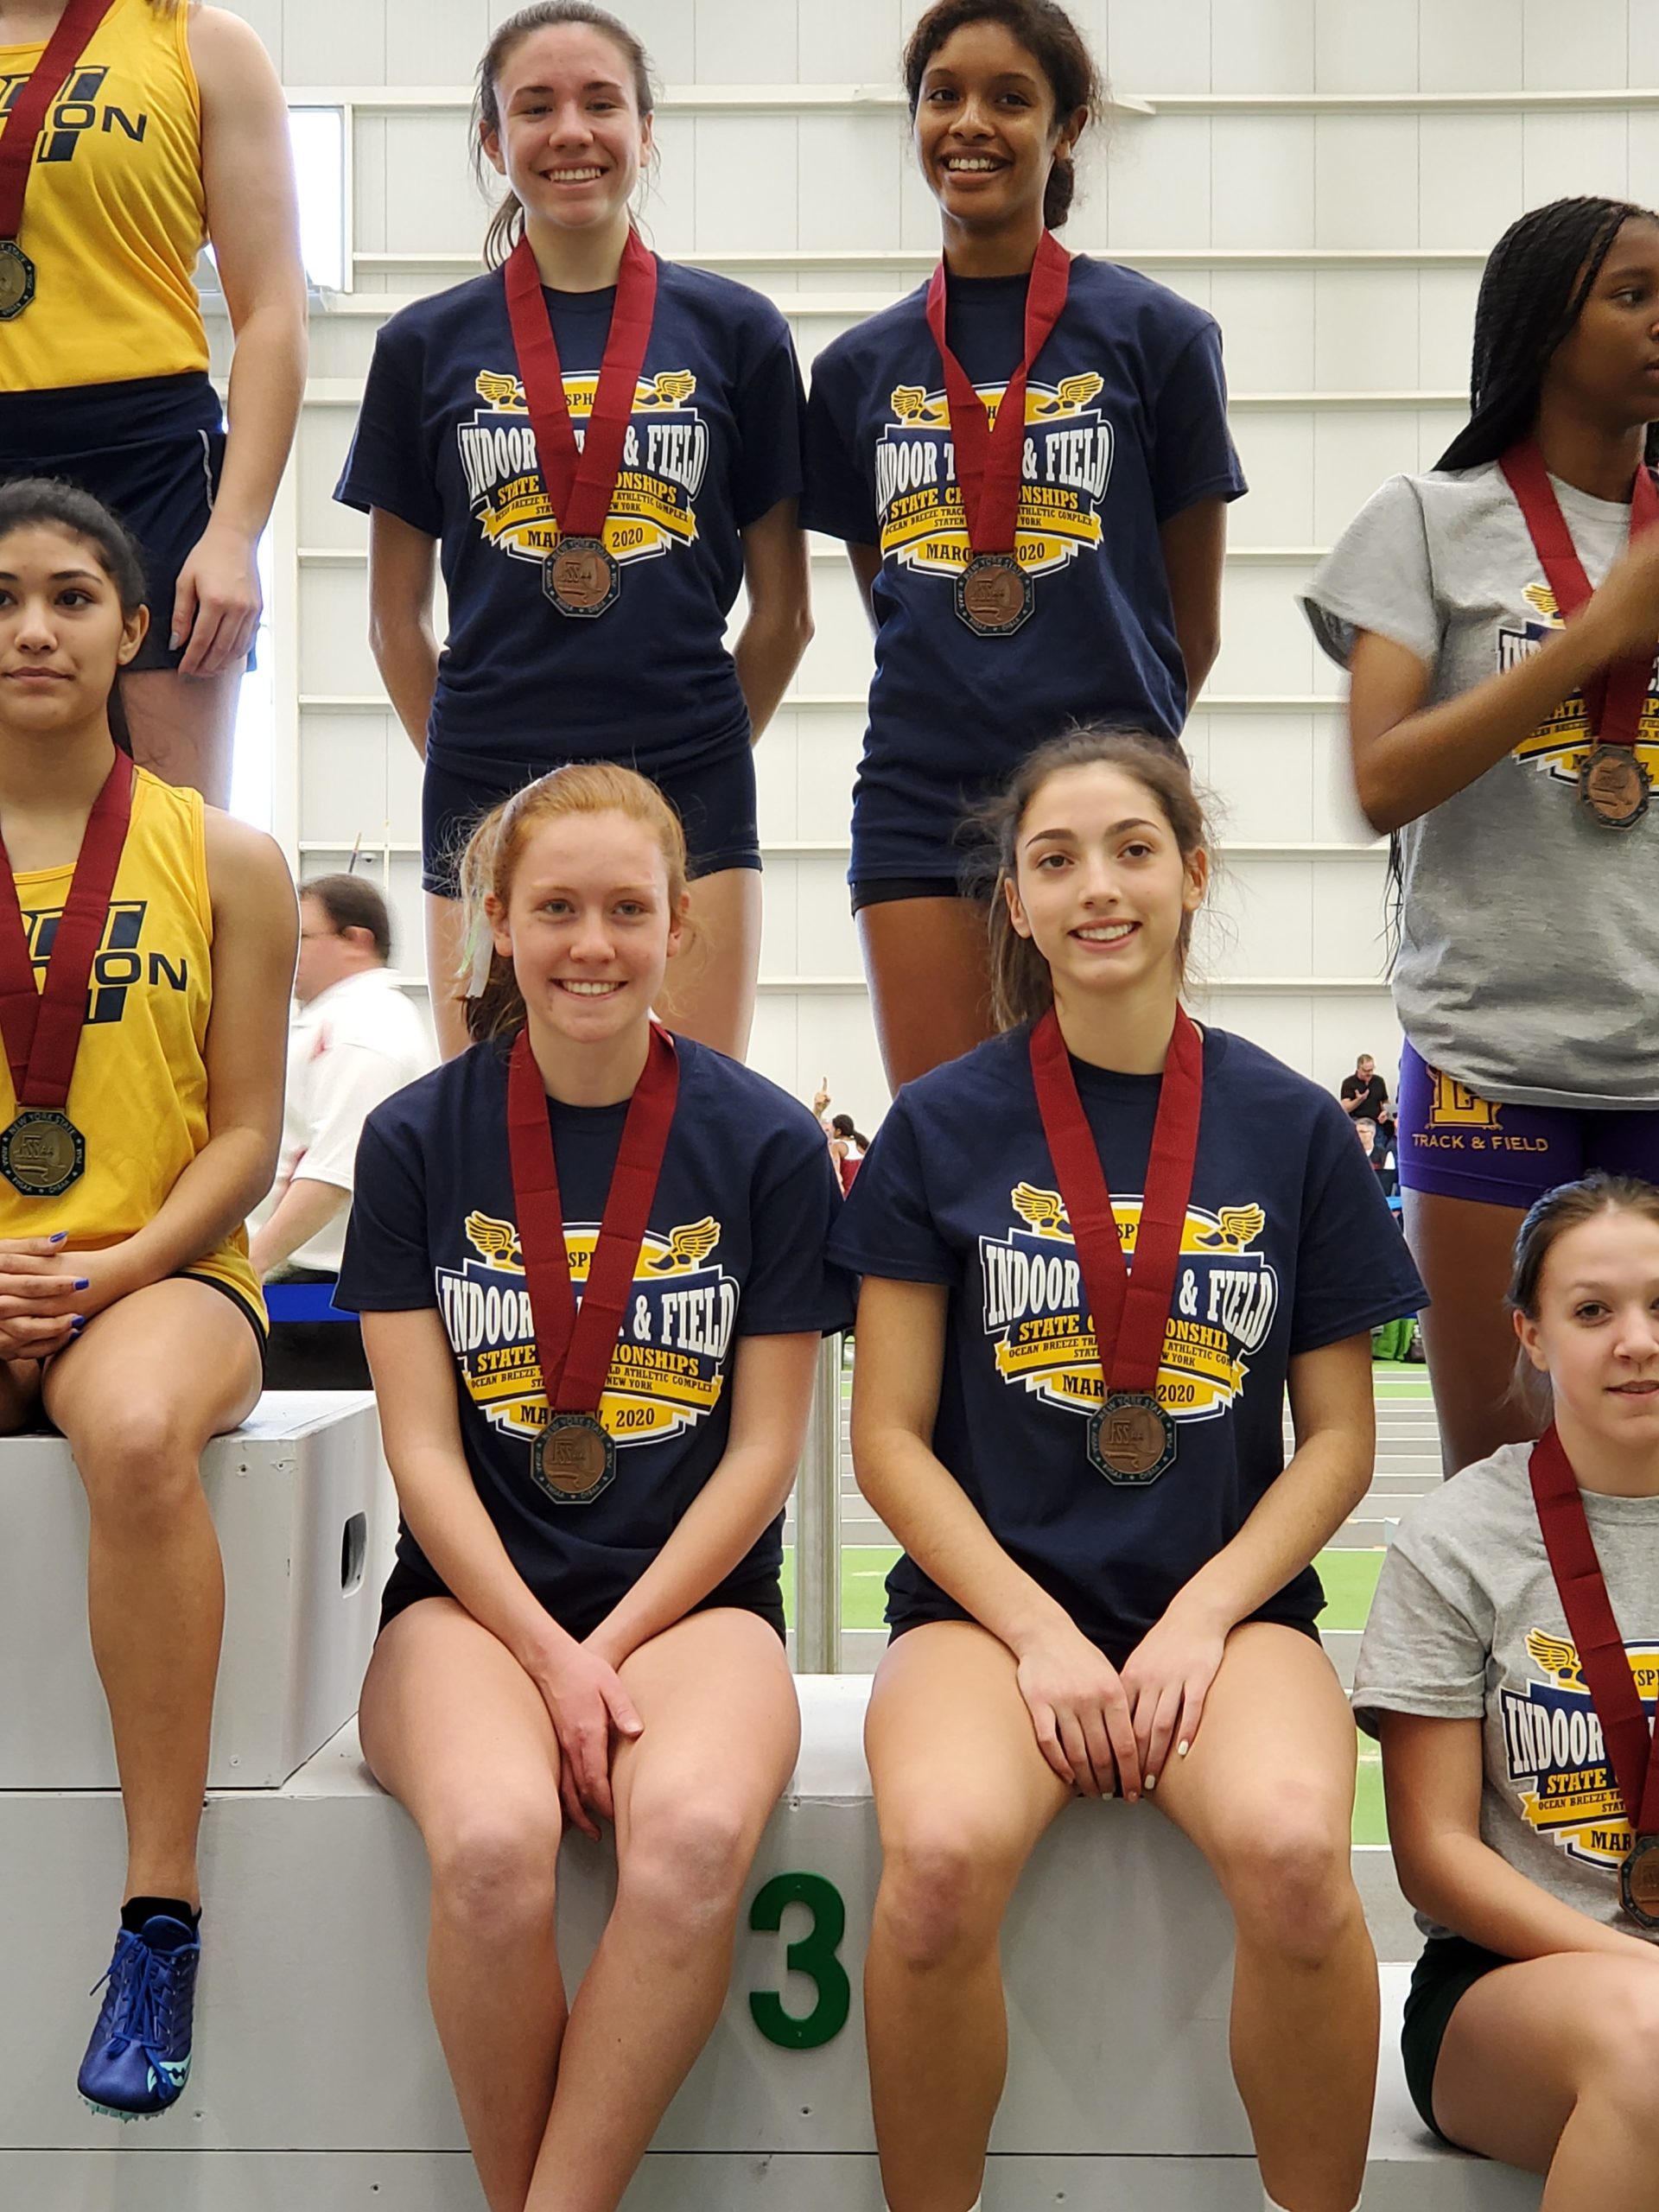 Westhampton Beach junior Jackie Amato, bottom left, earned a bronze medal as part of Section XI's intersectional distance medley relay team. She was joined by Krista DeRaveniere (Riverhead), Kyra Franks (Mt. Sinai) and Danielle Rose (Miller Place).